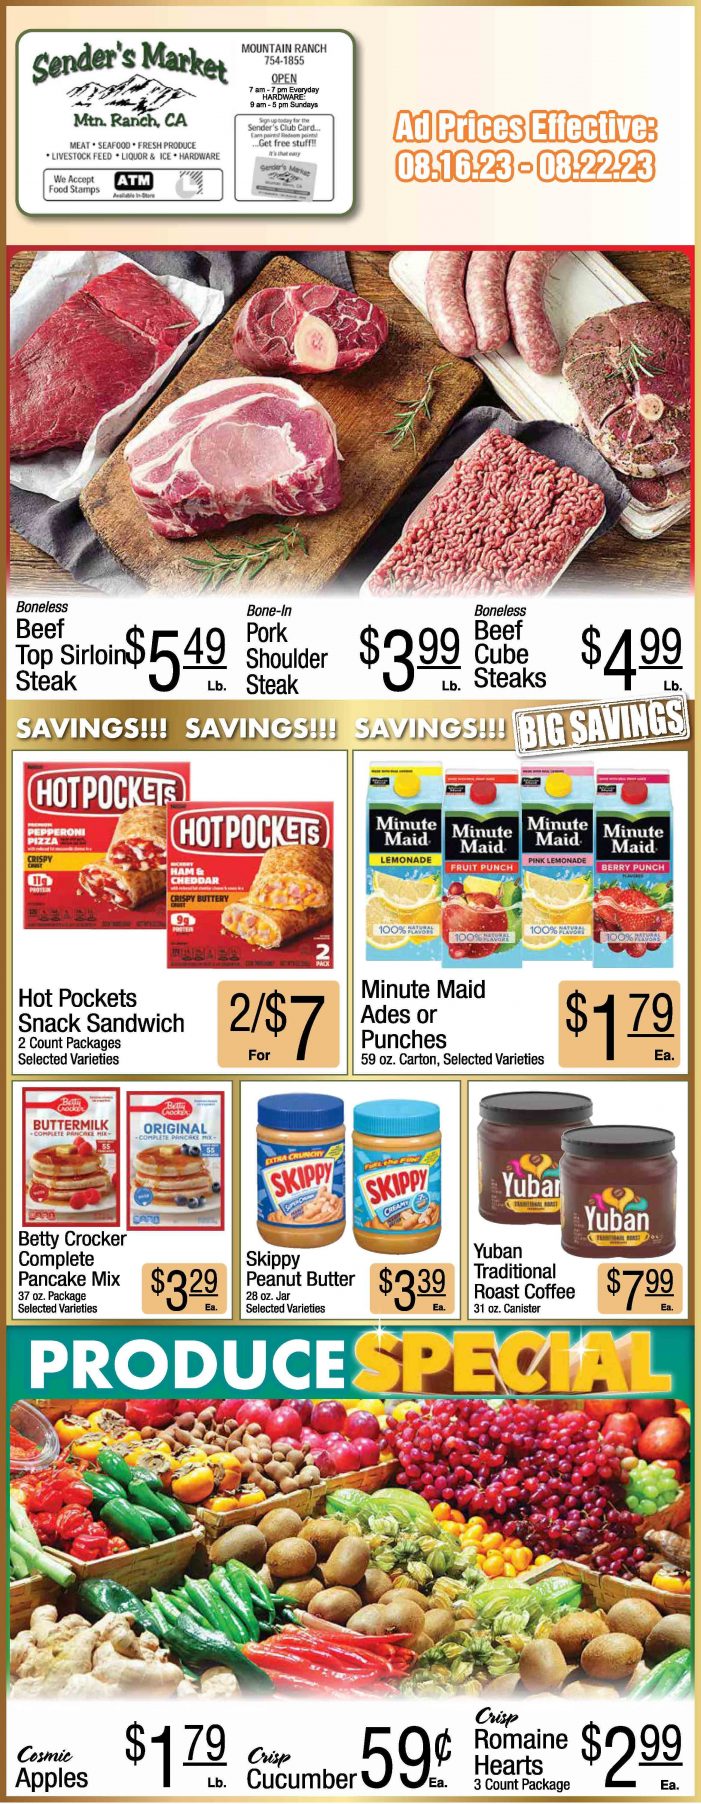 Sender’s Market Weekly Ad & Grocery Specials Through August 22nd! Shop Local & Save!!